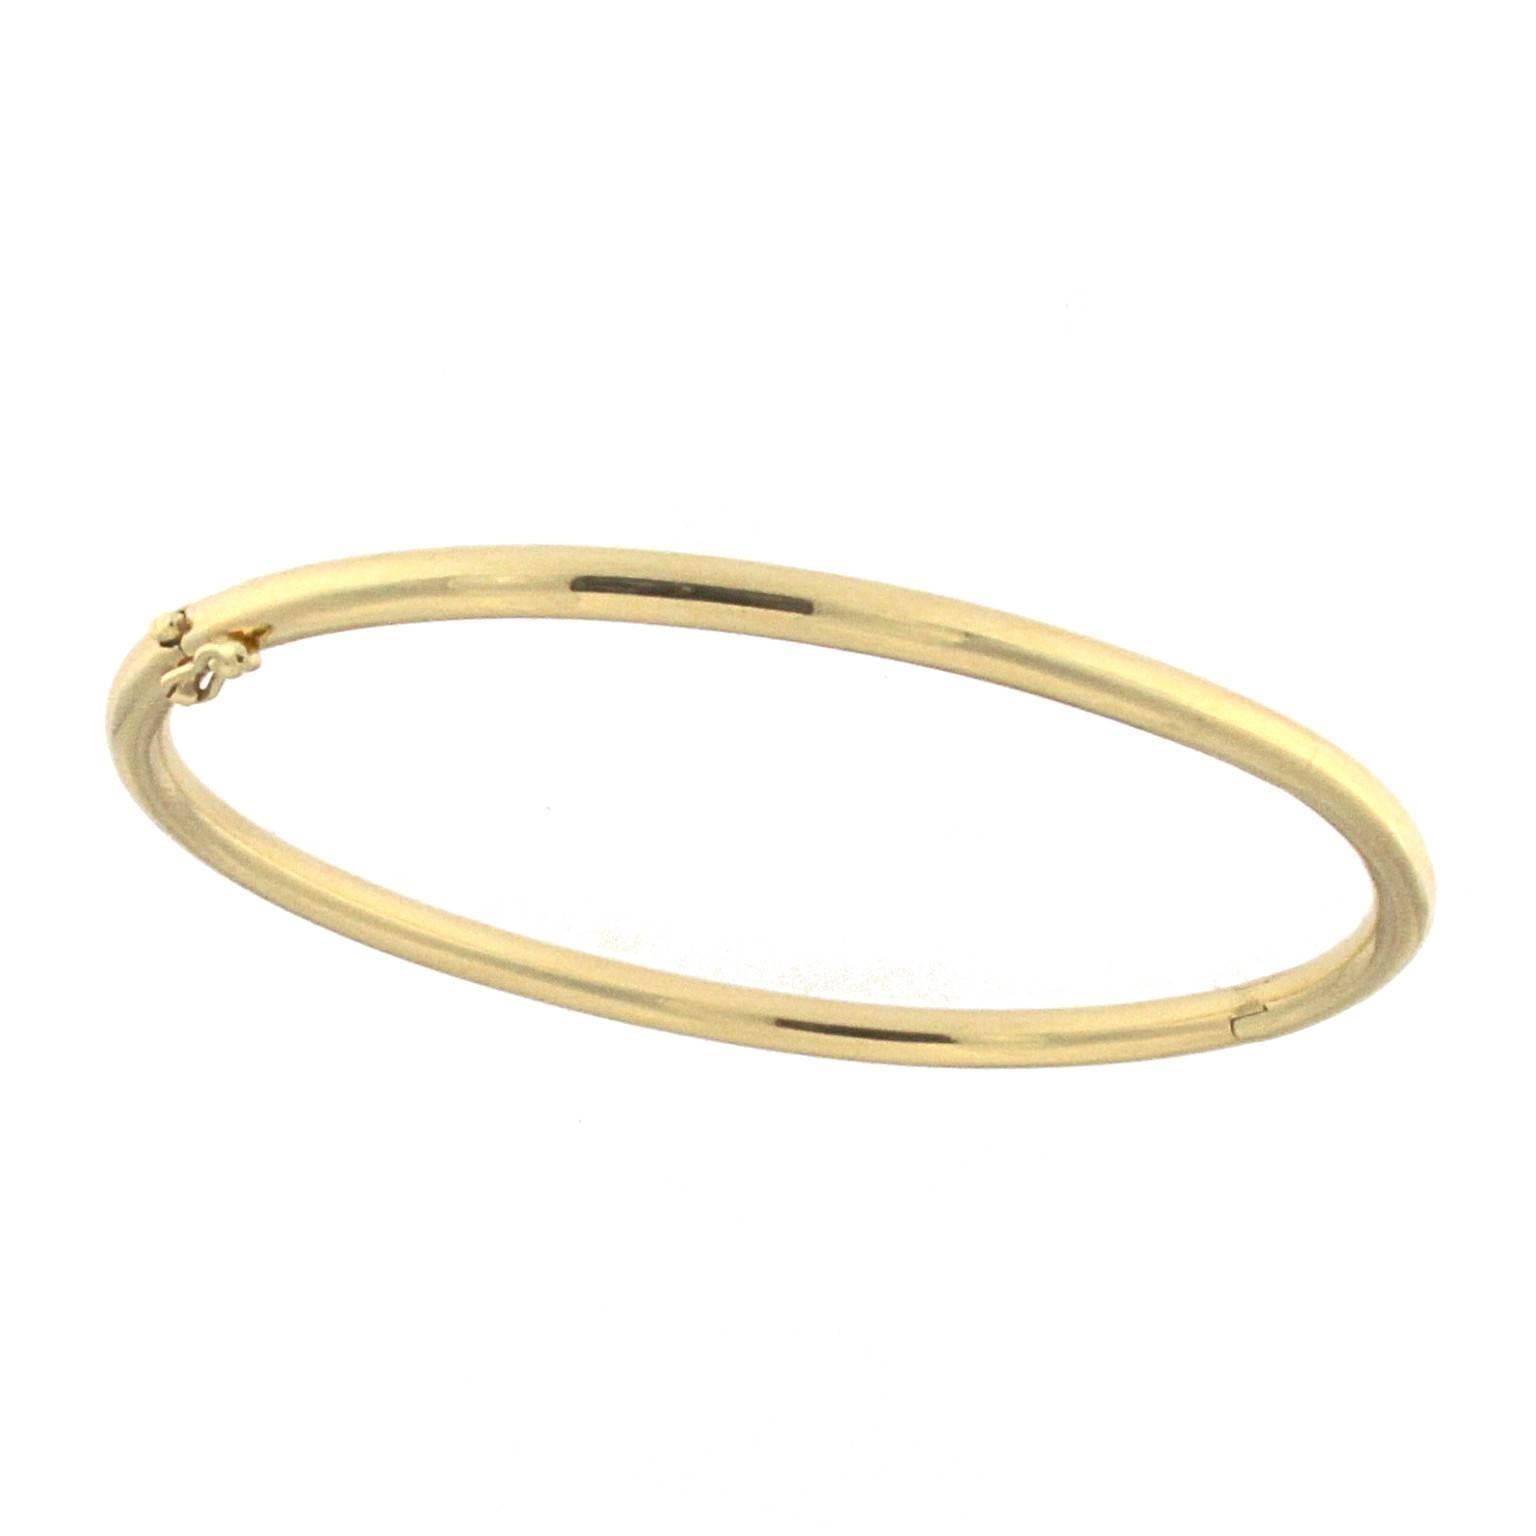 Rigid bracelet on oval shape made with thin round cane to perfectly fit the anatomy of the woman's wrist.
This bracelet is part of the collection  MINIMAL
Made entirely of yellow gold 
The total weight of the gold is GR 16,80
Stamp 750 10 MI